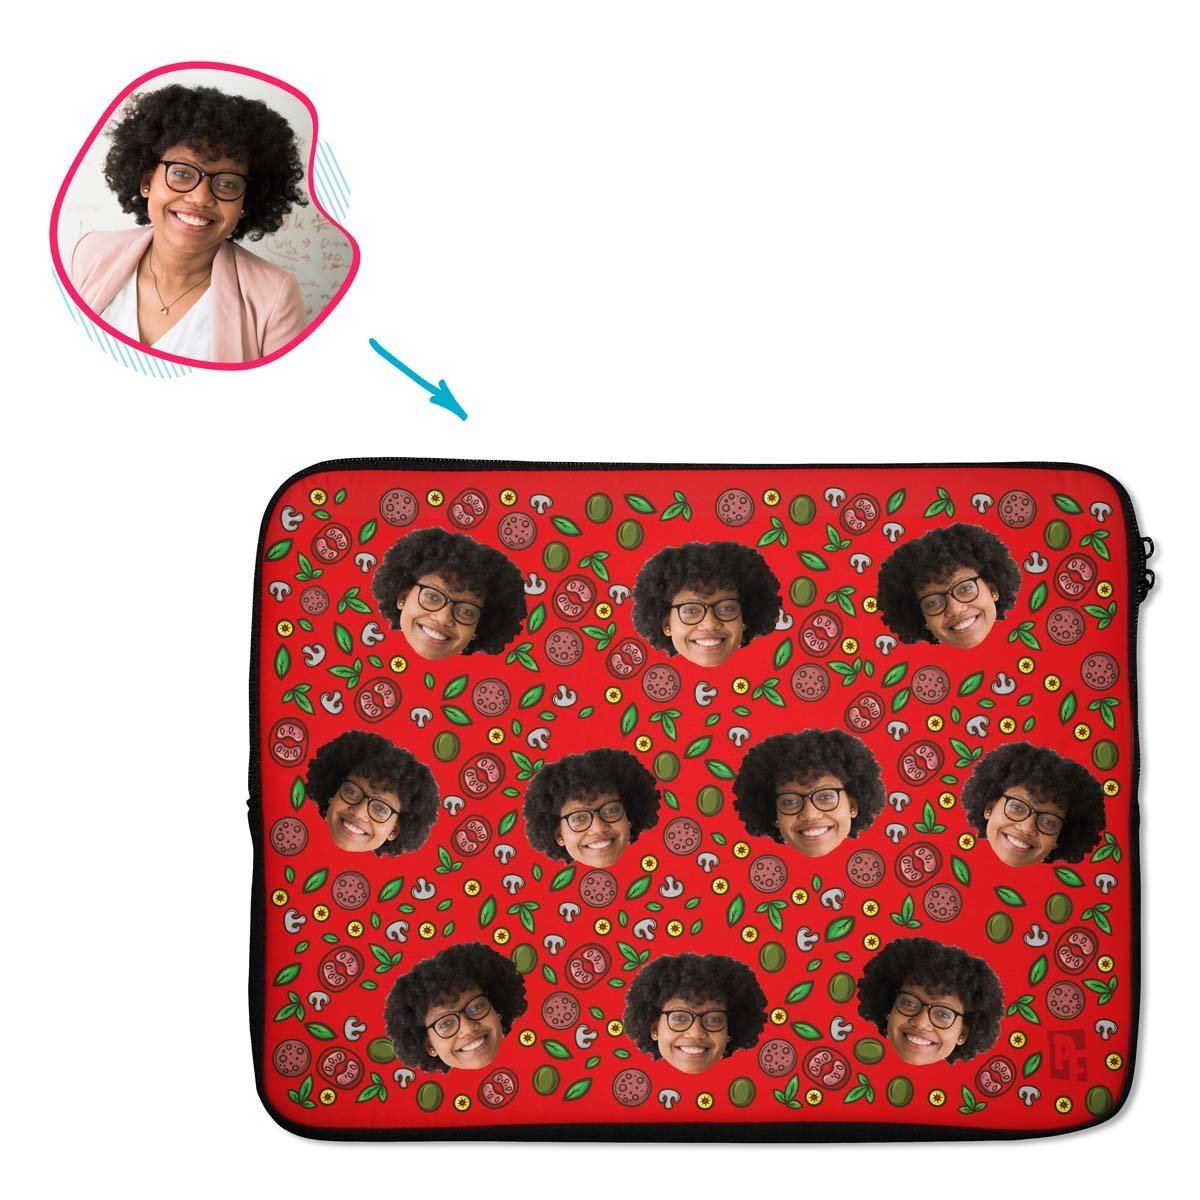 Pizza Personalized Laptop Sleeve